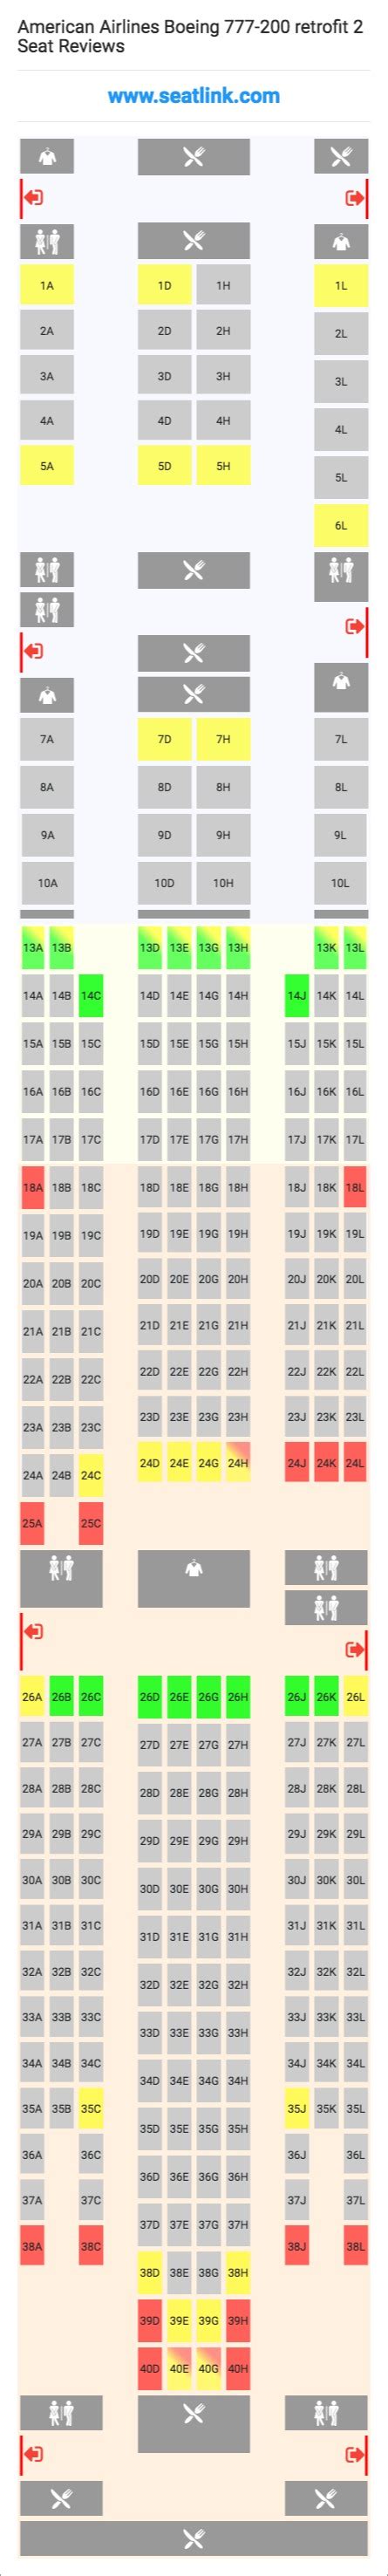 There are 4 flat bed seats in first class, 35 flat seatguru's seatmap is correct.42a & 42b are next to each other.seatmap on air india's website is incorrect,which shows a gap between. Boeing 777 200 Seating Plan United Airlines | Brokeasshome.com